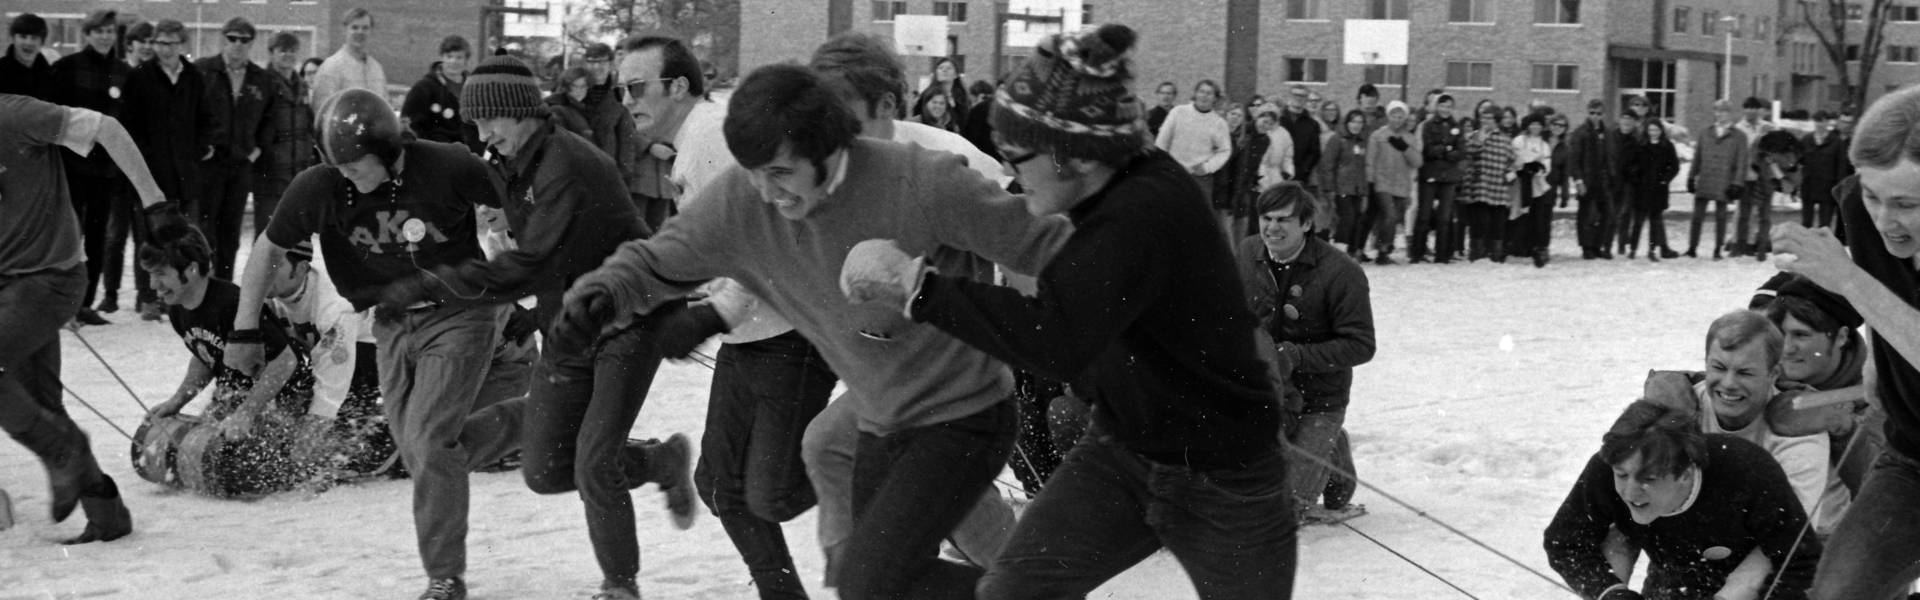 Male students competing in a sled race, ca. 1964-1971